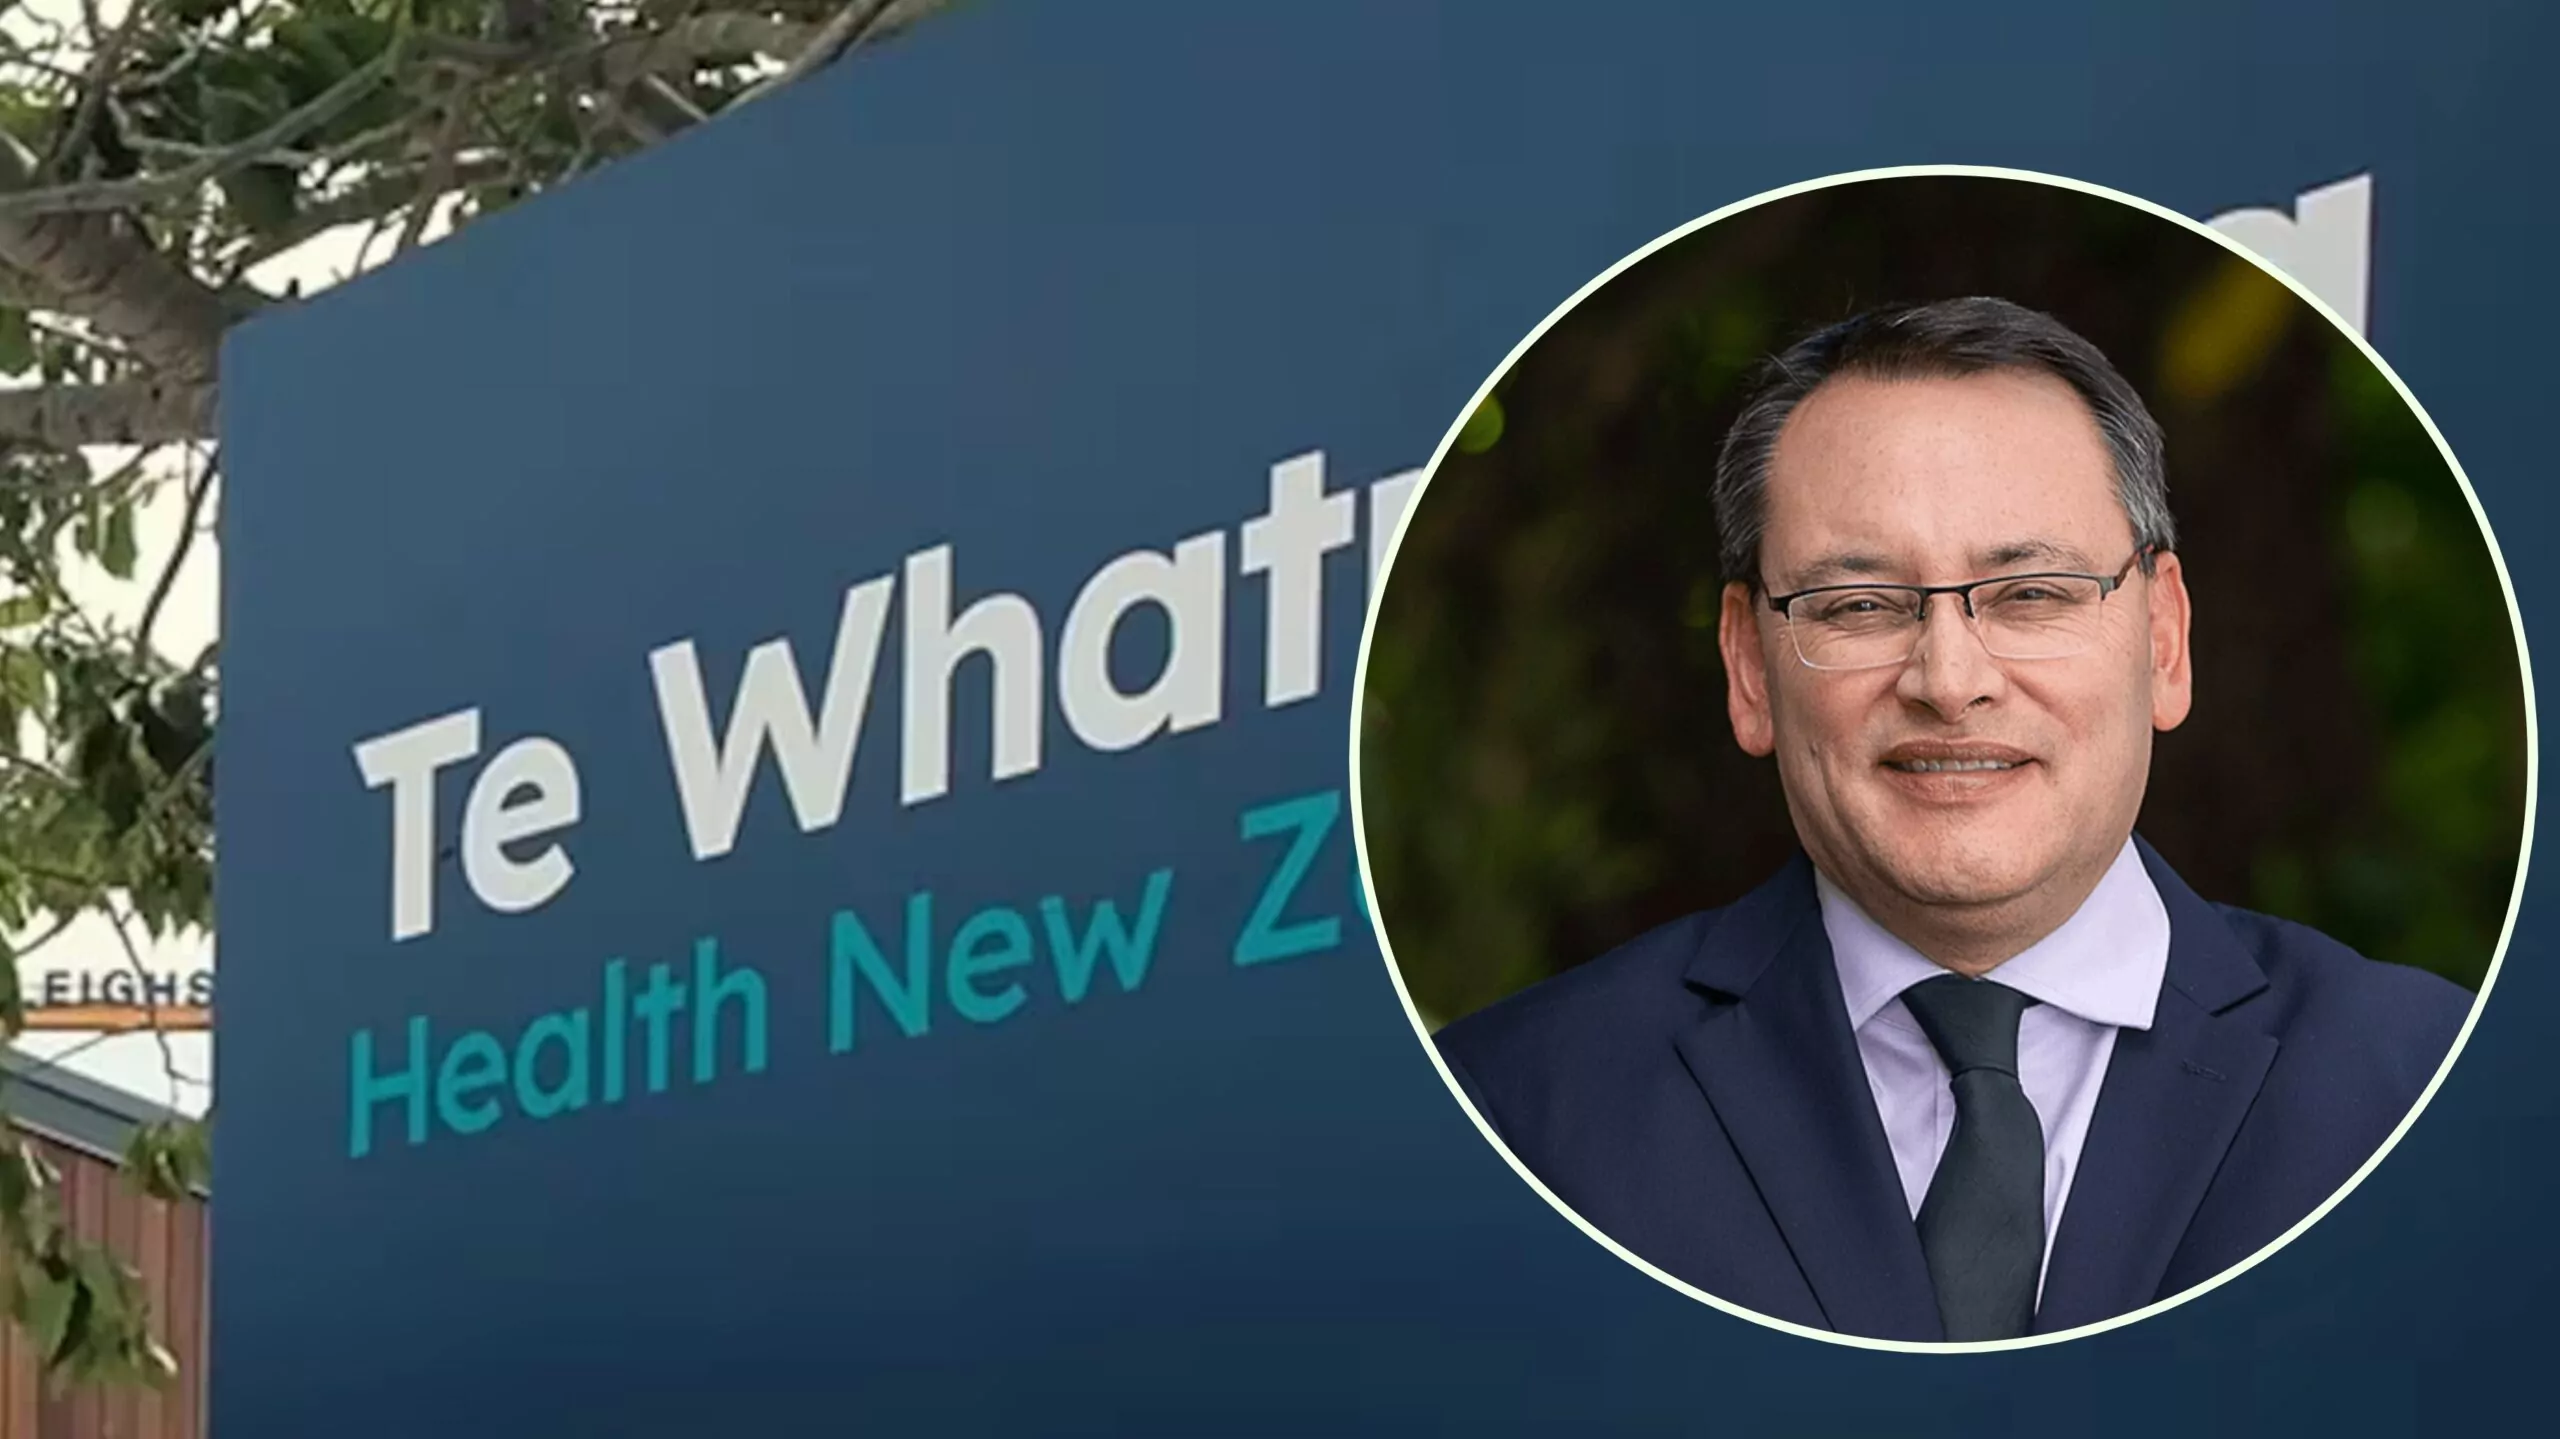 Minister sacks Health NZ board, replaces it with Commissioner